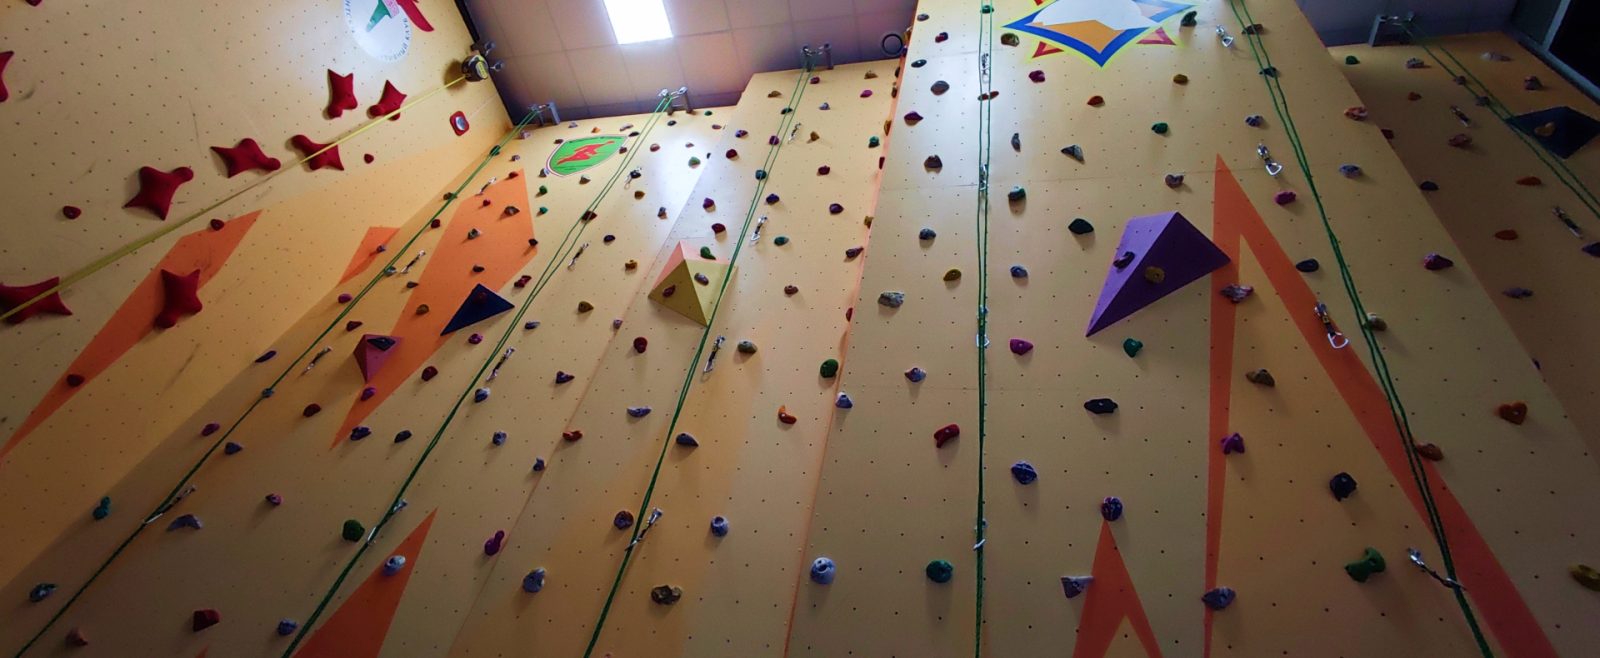 There is a climbing wall in the center of safety!